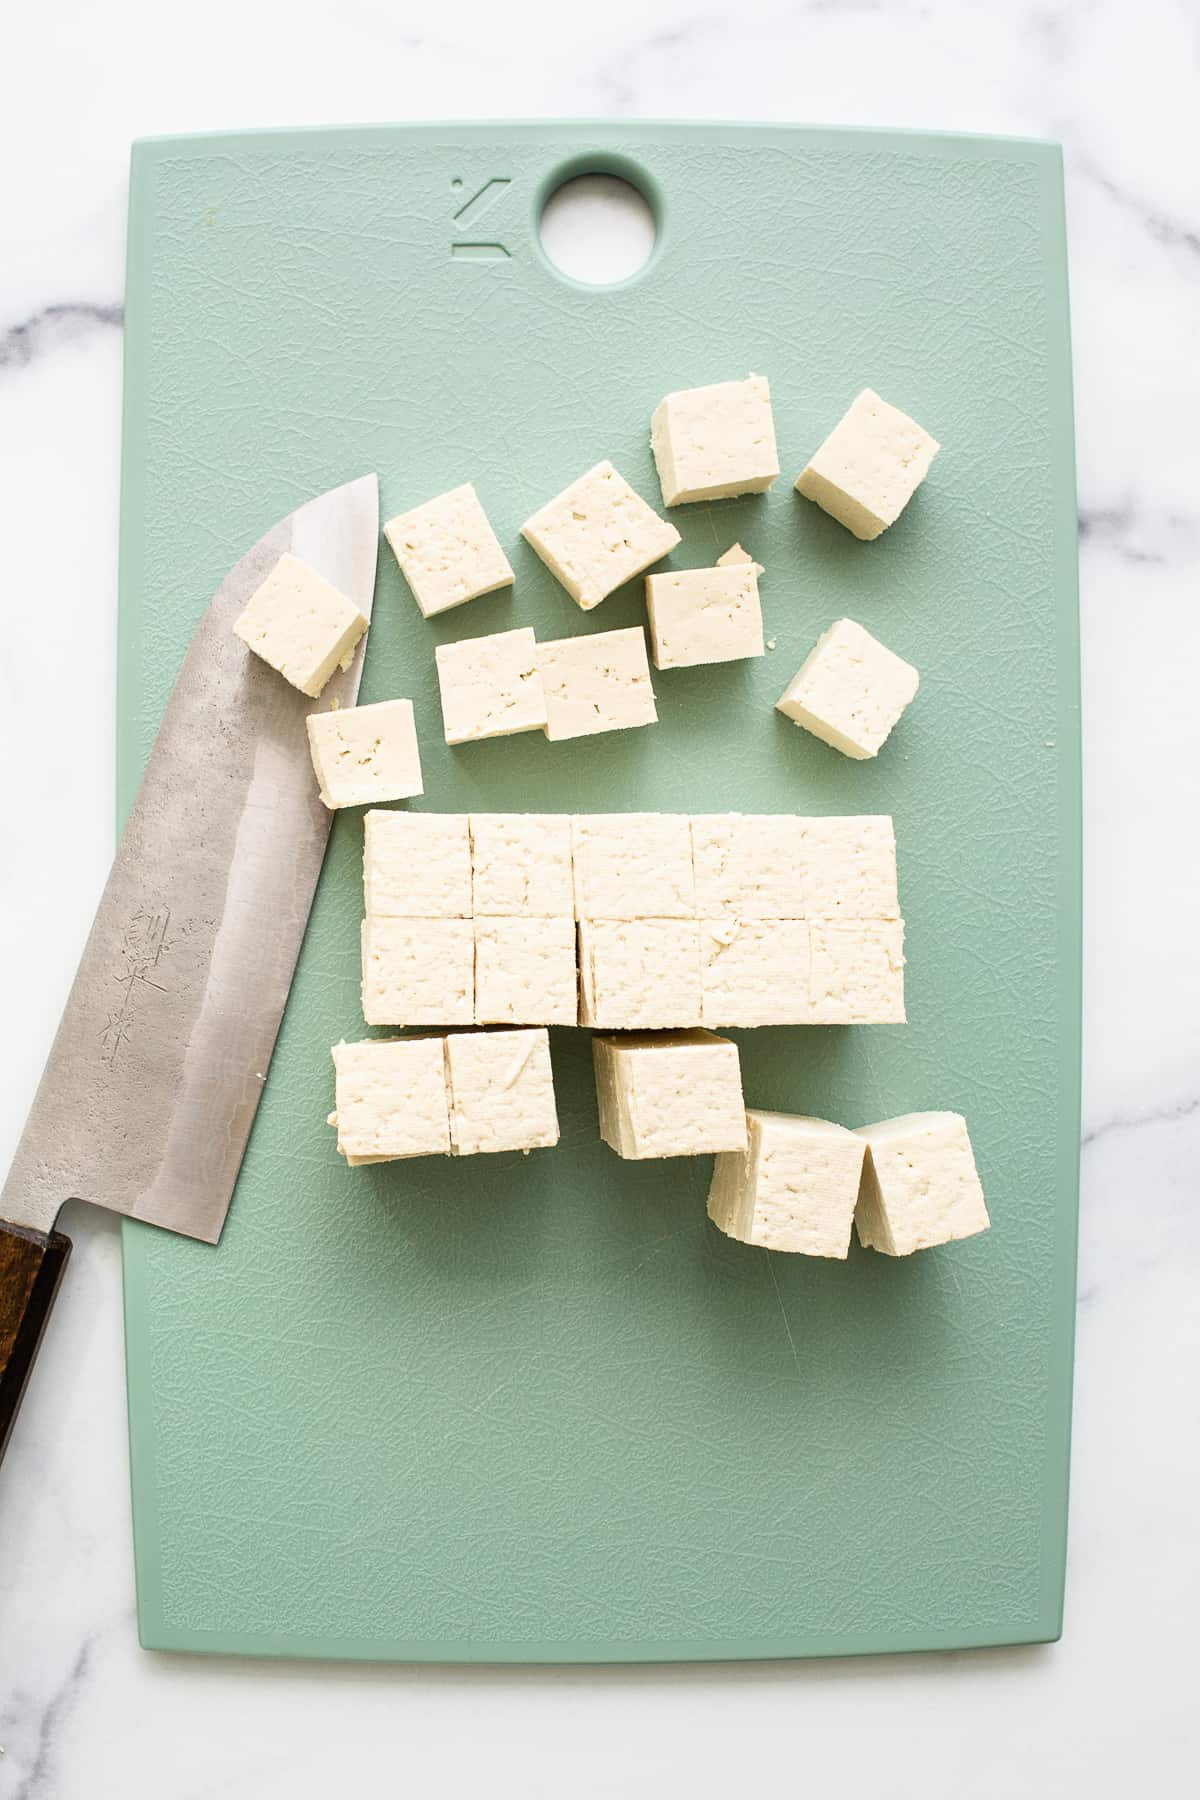 Slicing the tofu into cubes.